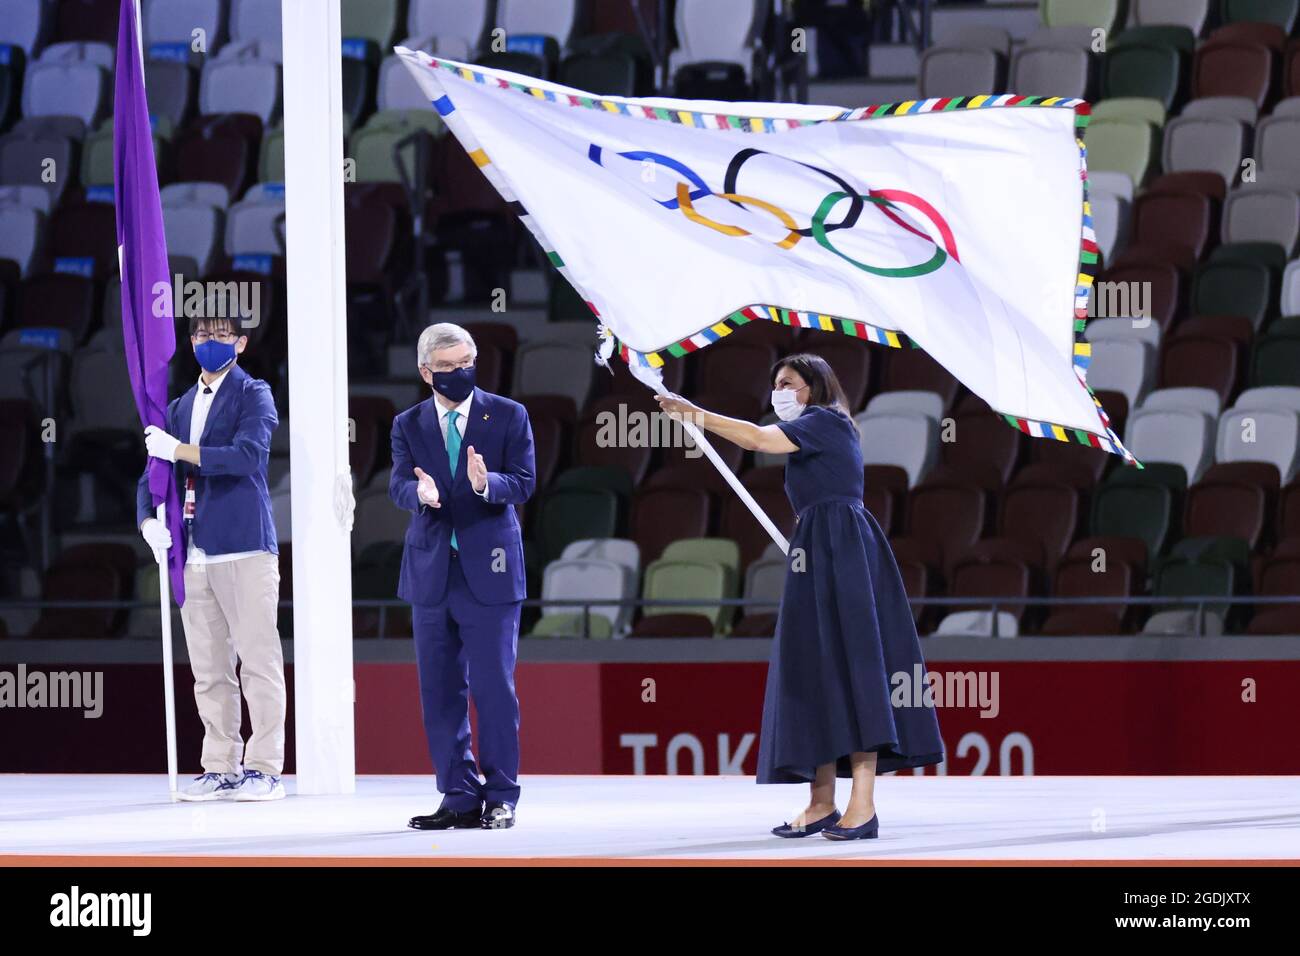 (L-R) Thomas Bach IOC President applauds as Anne Hidalgo Paris Mayor waves the Olympic flag, AUGUST 8, 2021 : Tokyo 2020 Olympic Games Closing Ceremony at the Olympic Stadium in Tokyo, Japan. Credit: Yohei Osada/AFLO SPORT/Alamy Live News Stock Photo